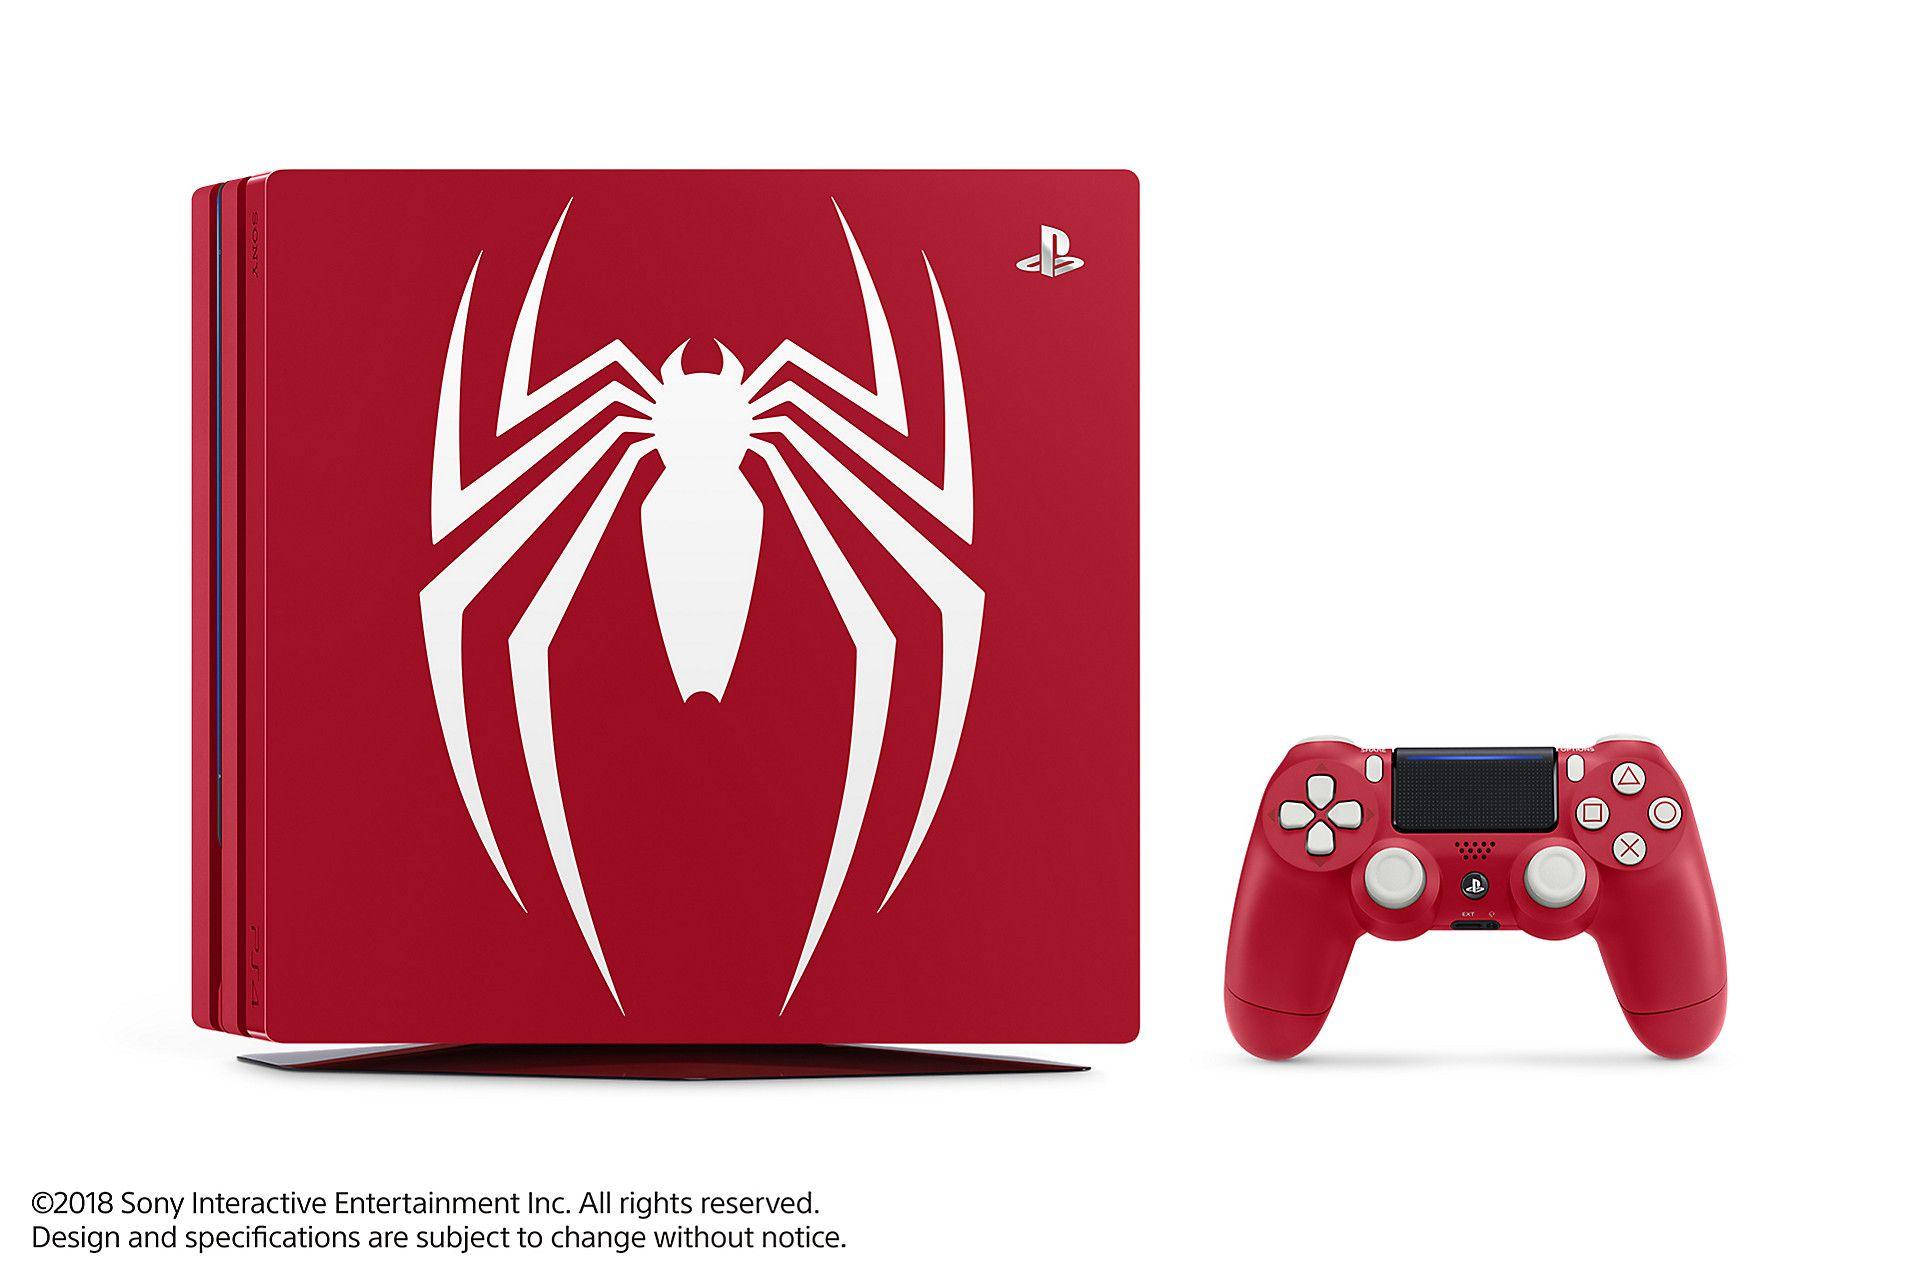 PS4 Logo - The Spider Man PS4 Pro Bundle Splashes The White Logo Across A Red